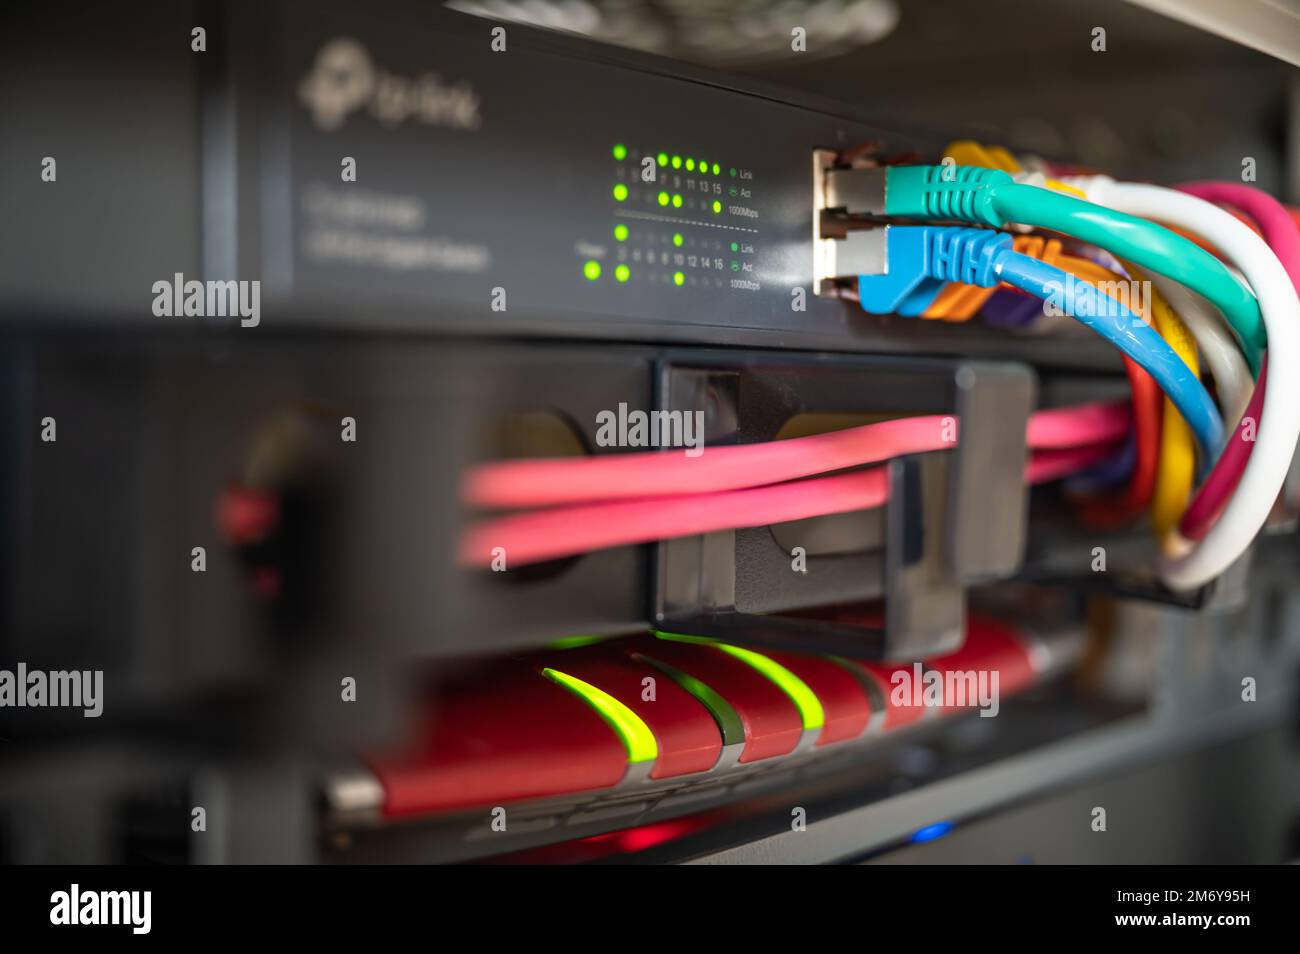 Router and switch with colorful LAN cables in a network cabinet of a data center Stock Photo